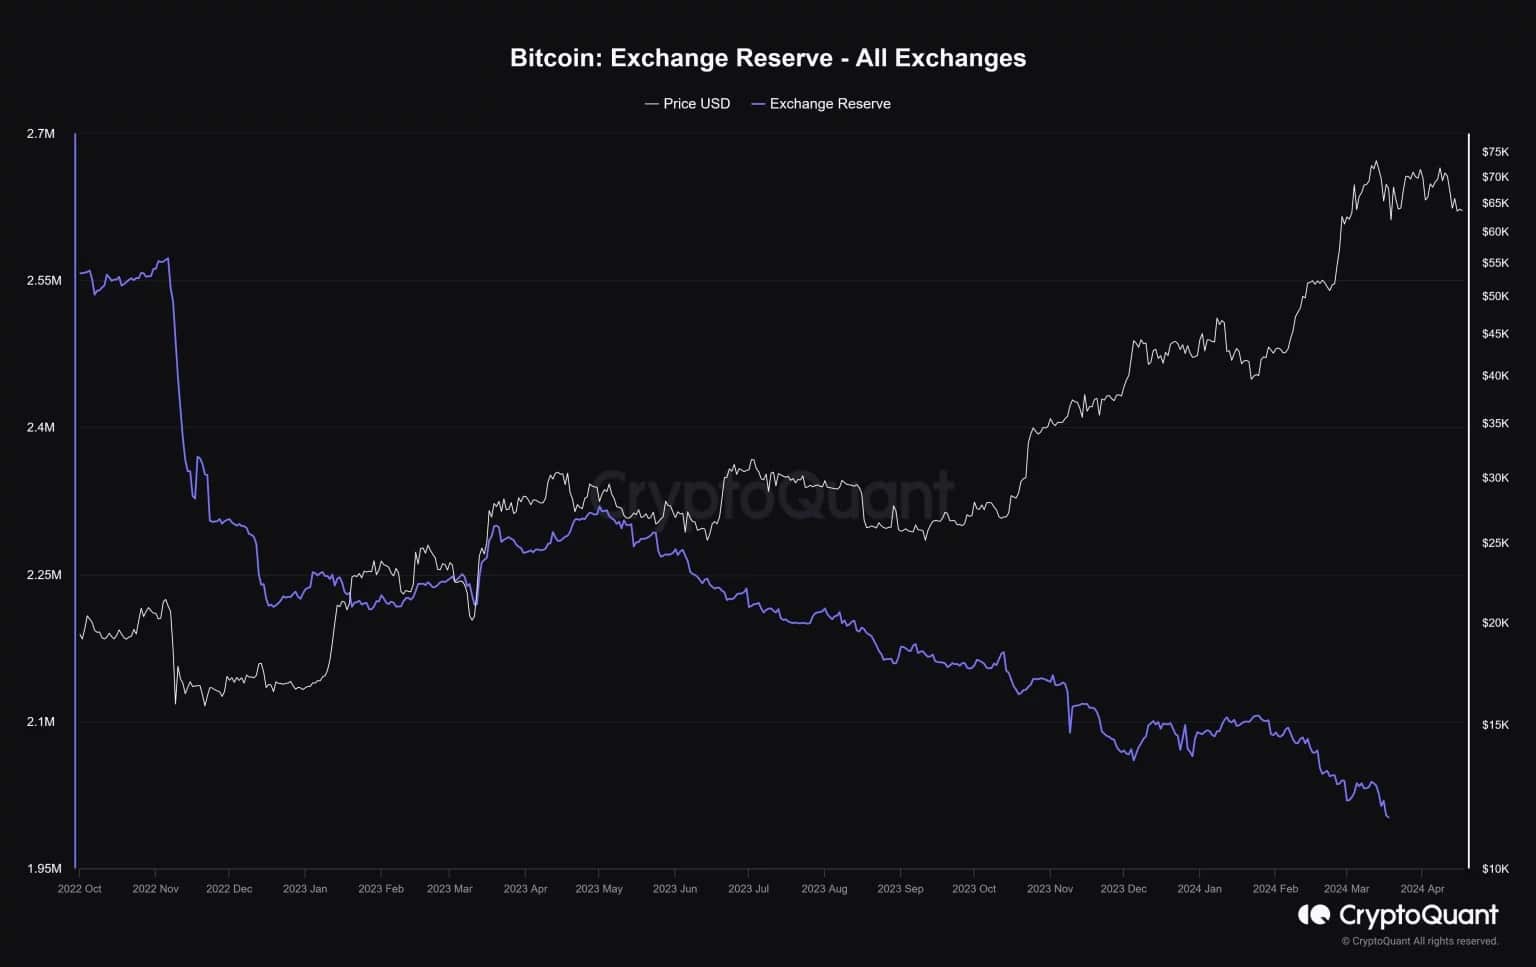 Exchange reserves fall when the BTC price rises